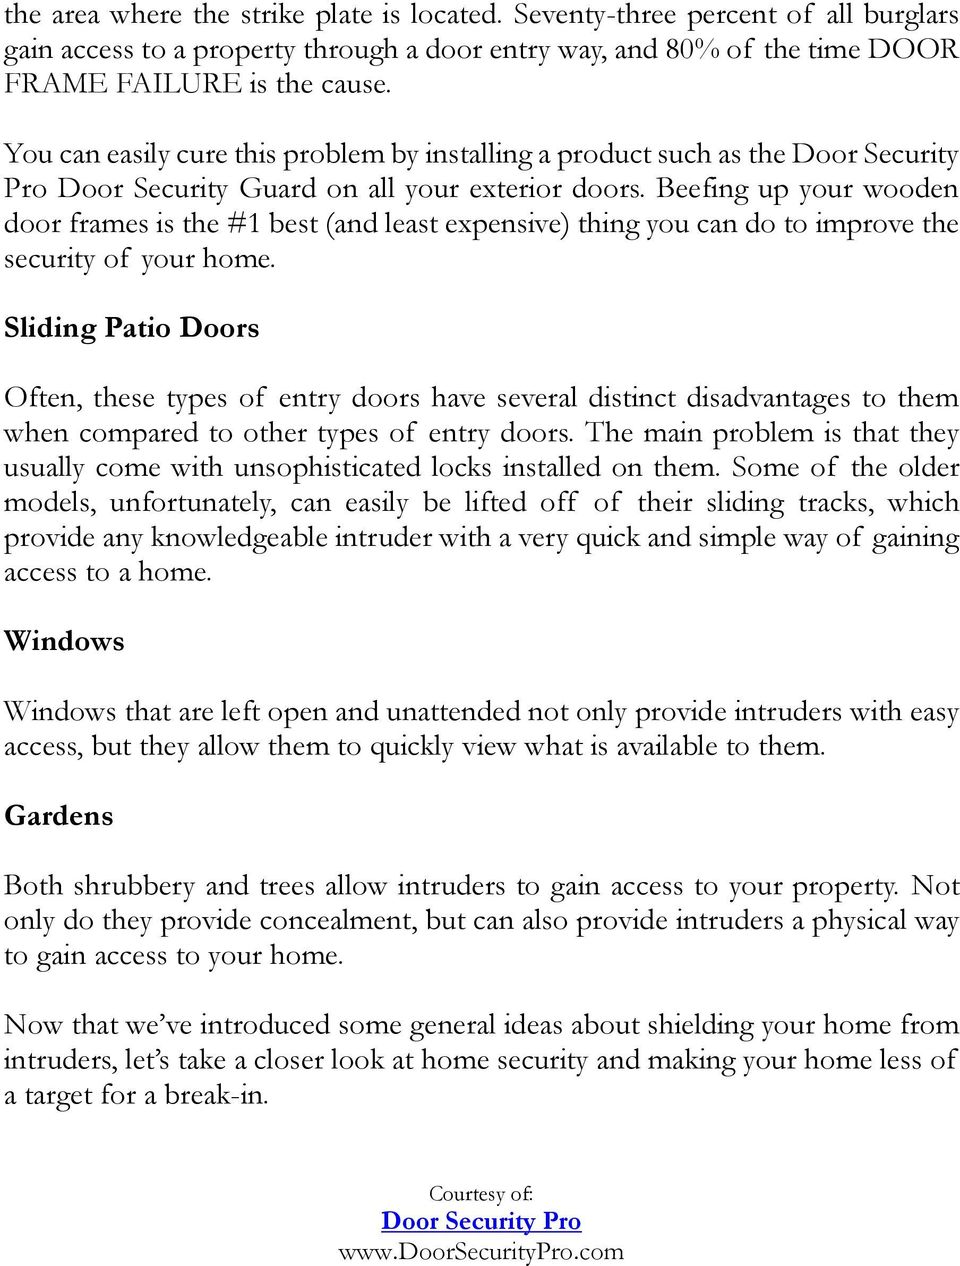 Beefing up your wooden door frames is the #1 best (and least expensive) thing you can do to improve the security of your home.